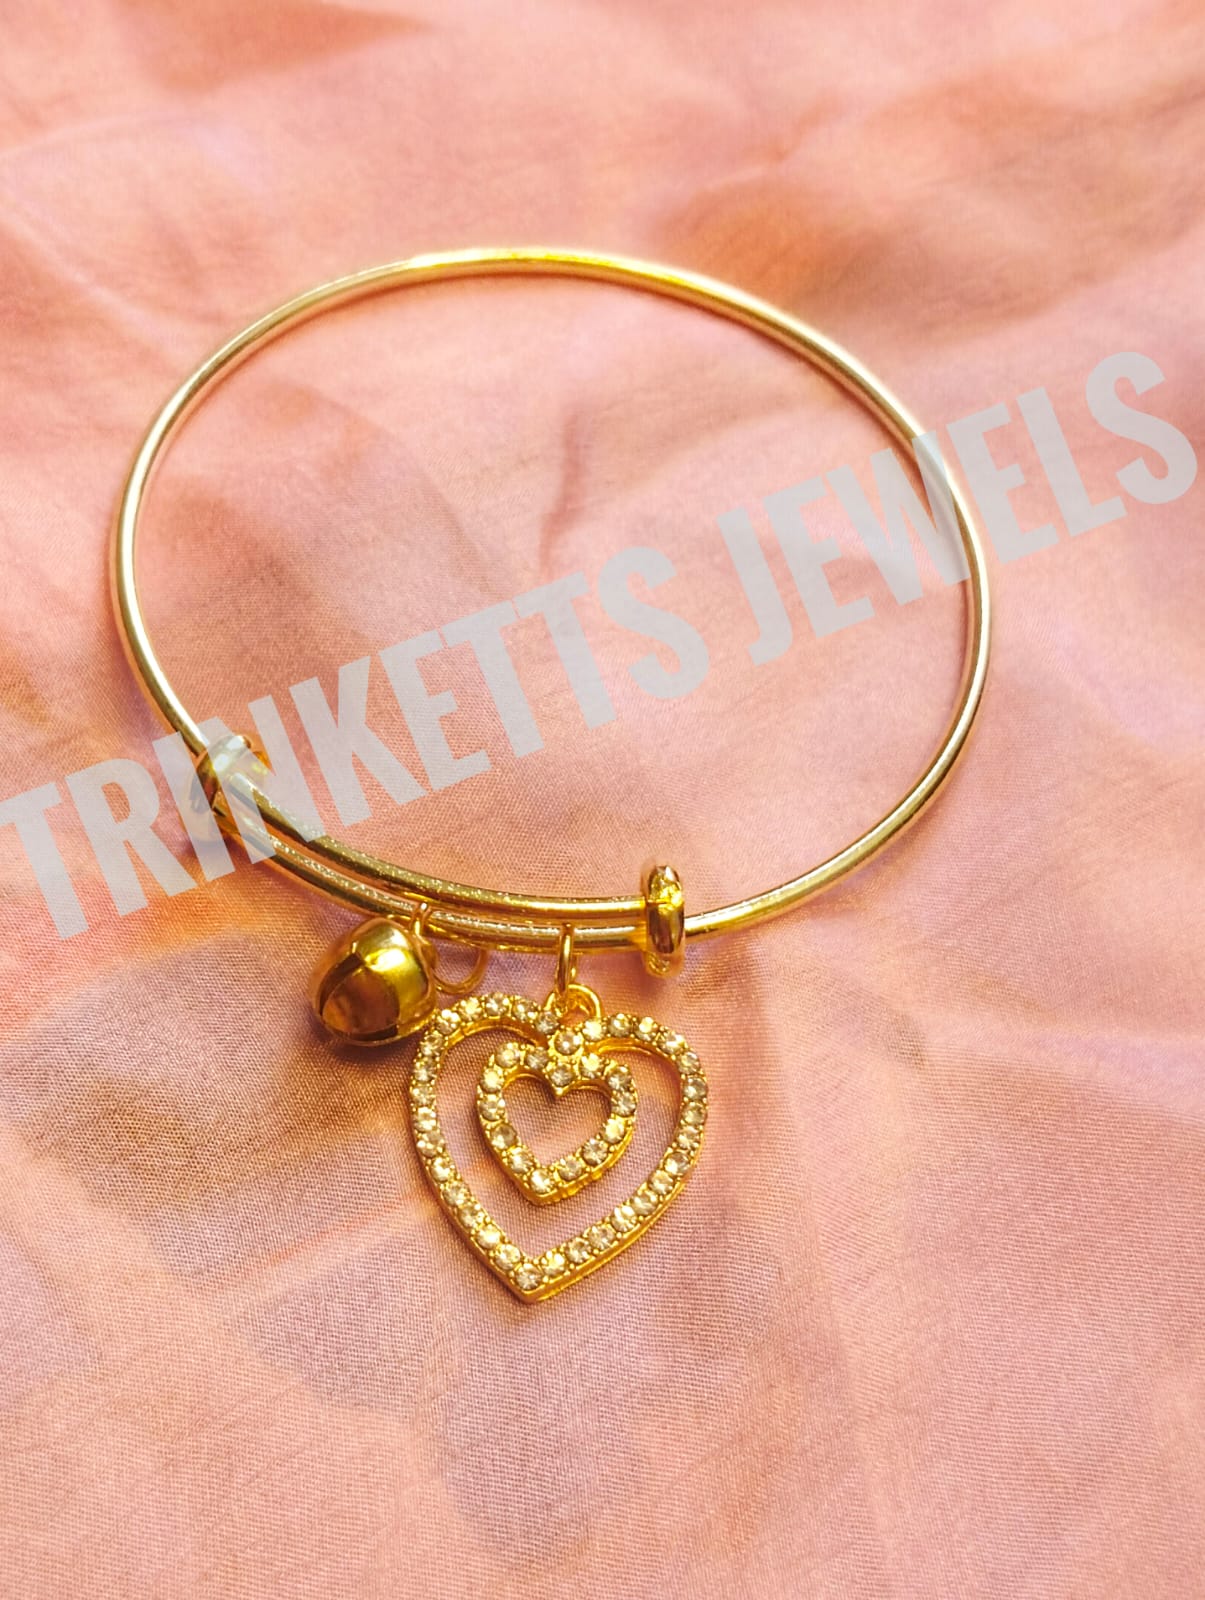 Trinketts Golden Charm Bracelet - Heart-shaped design with zircon outlines on a pink background.